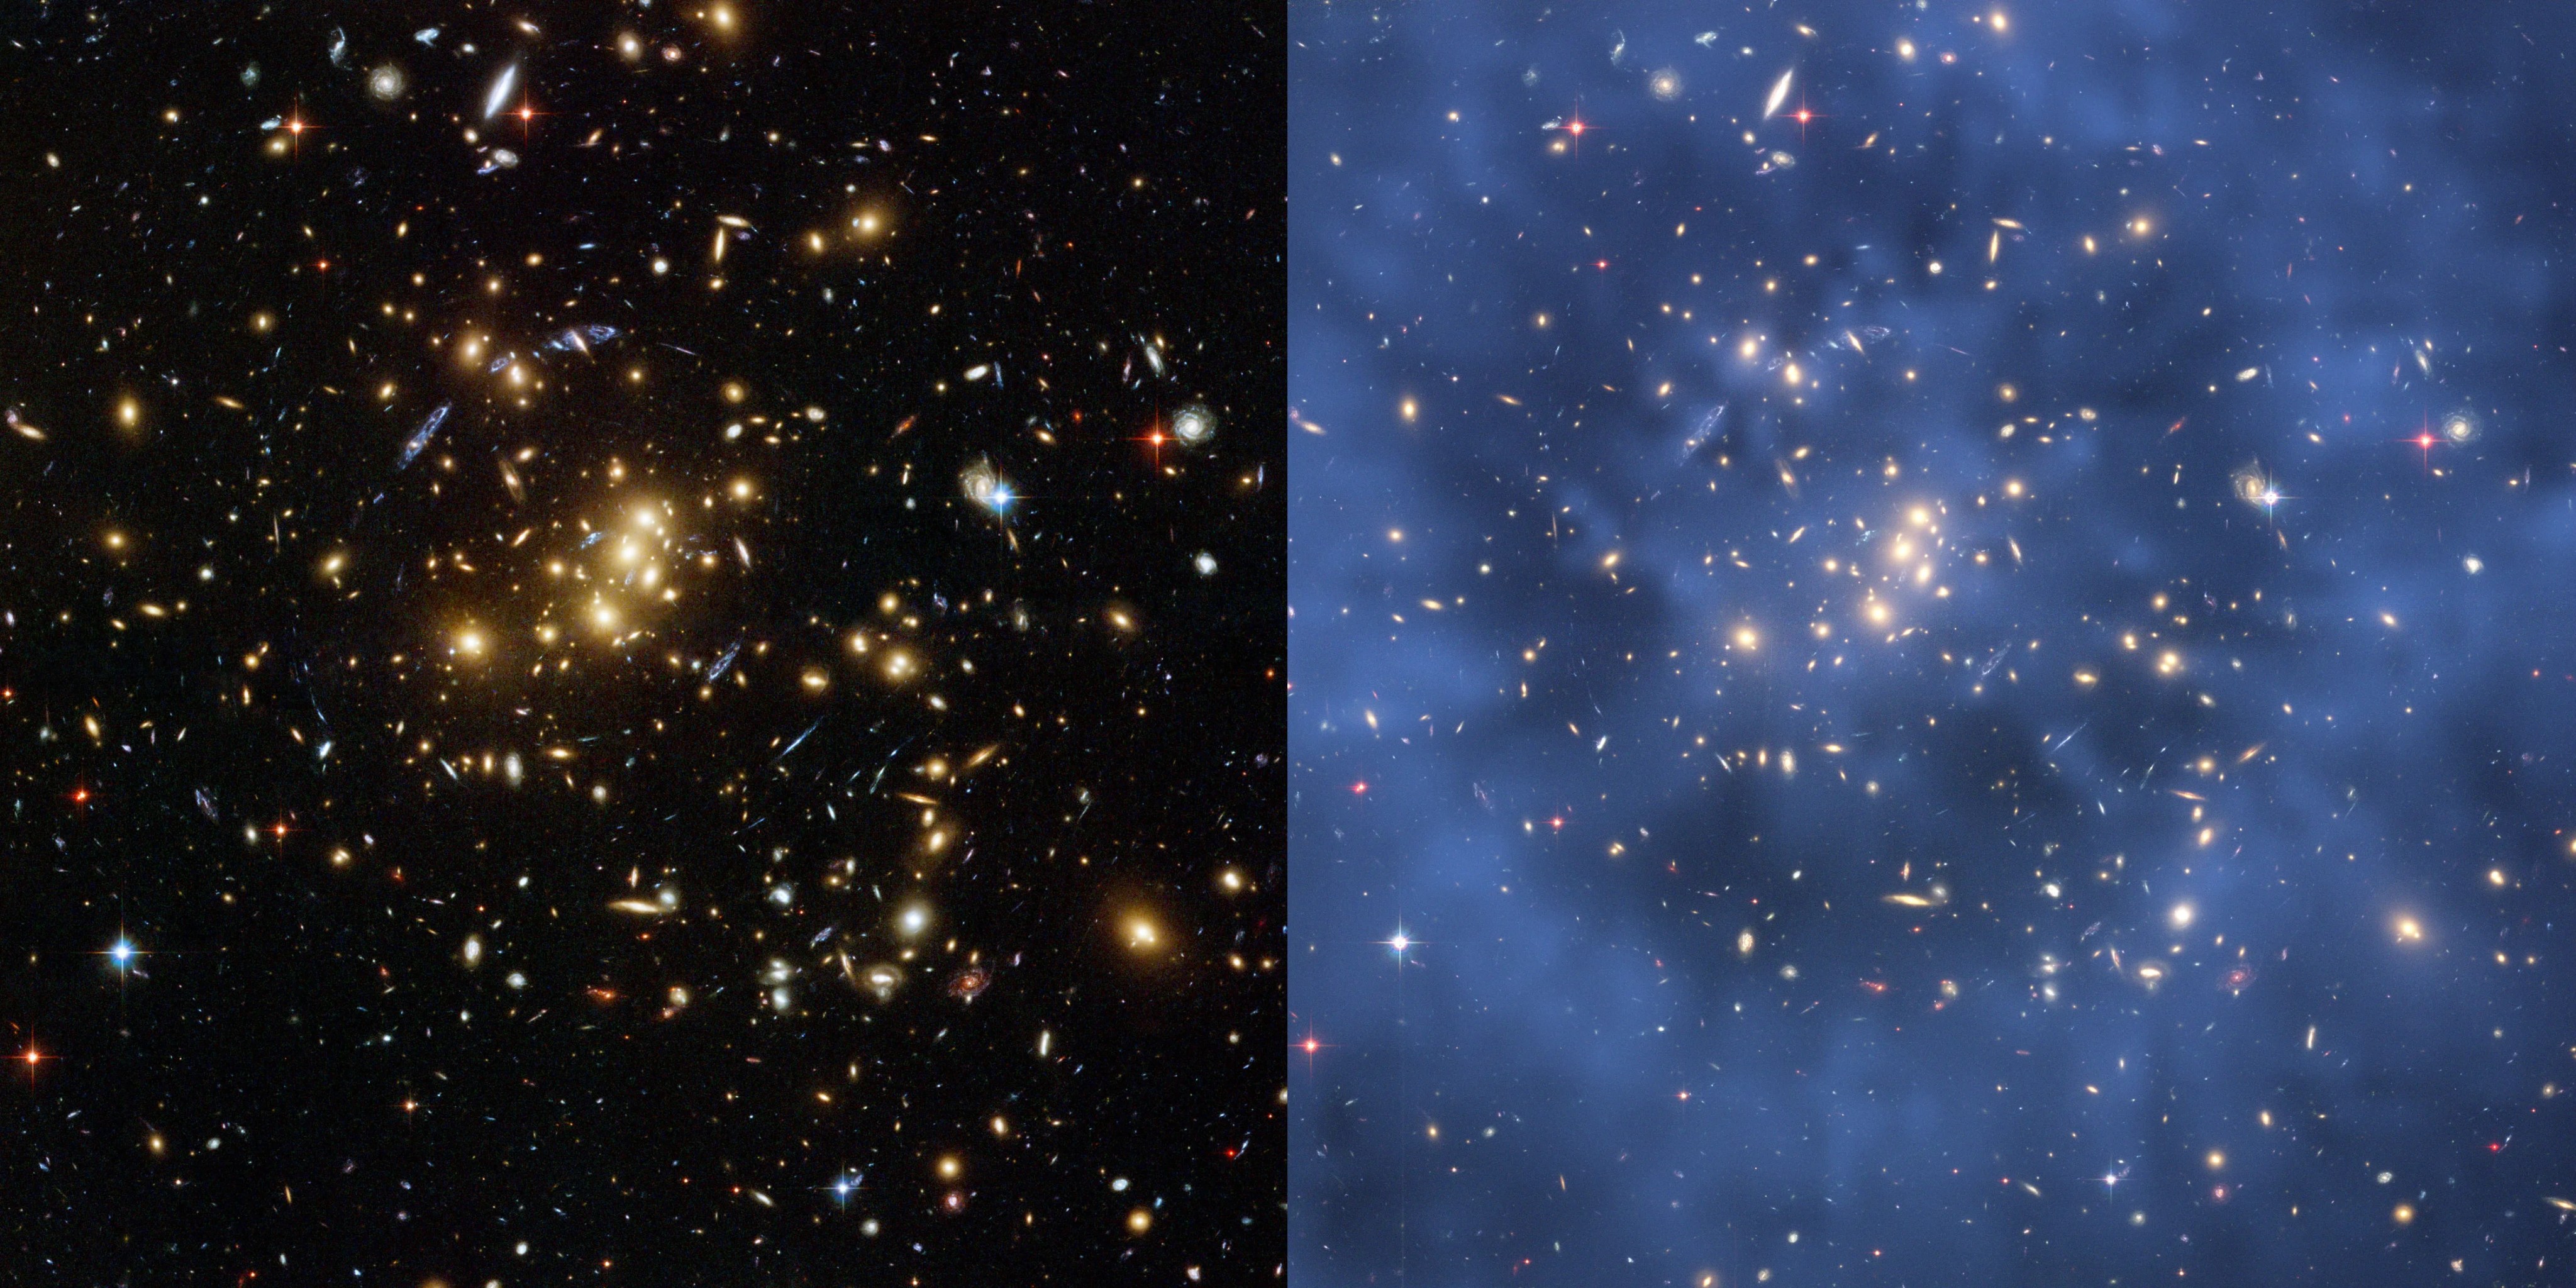 two Hubble images of galaxy cluster Cl 0024+17 (ZwCl 0024+1652), with right image shaded to illustrate dark matter